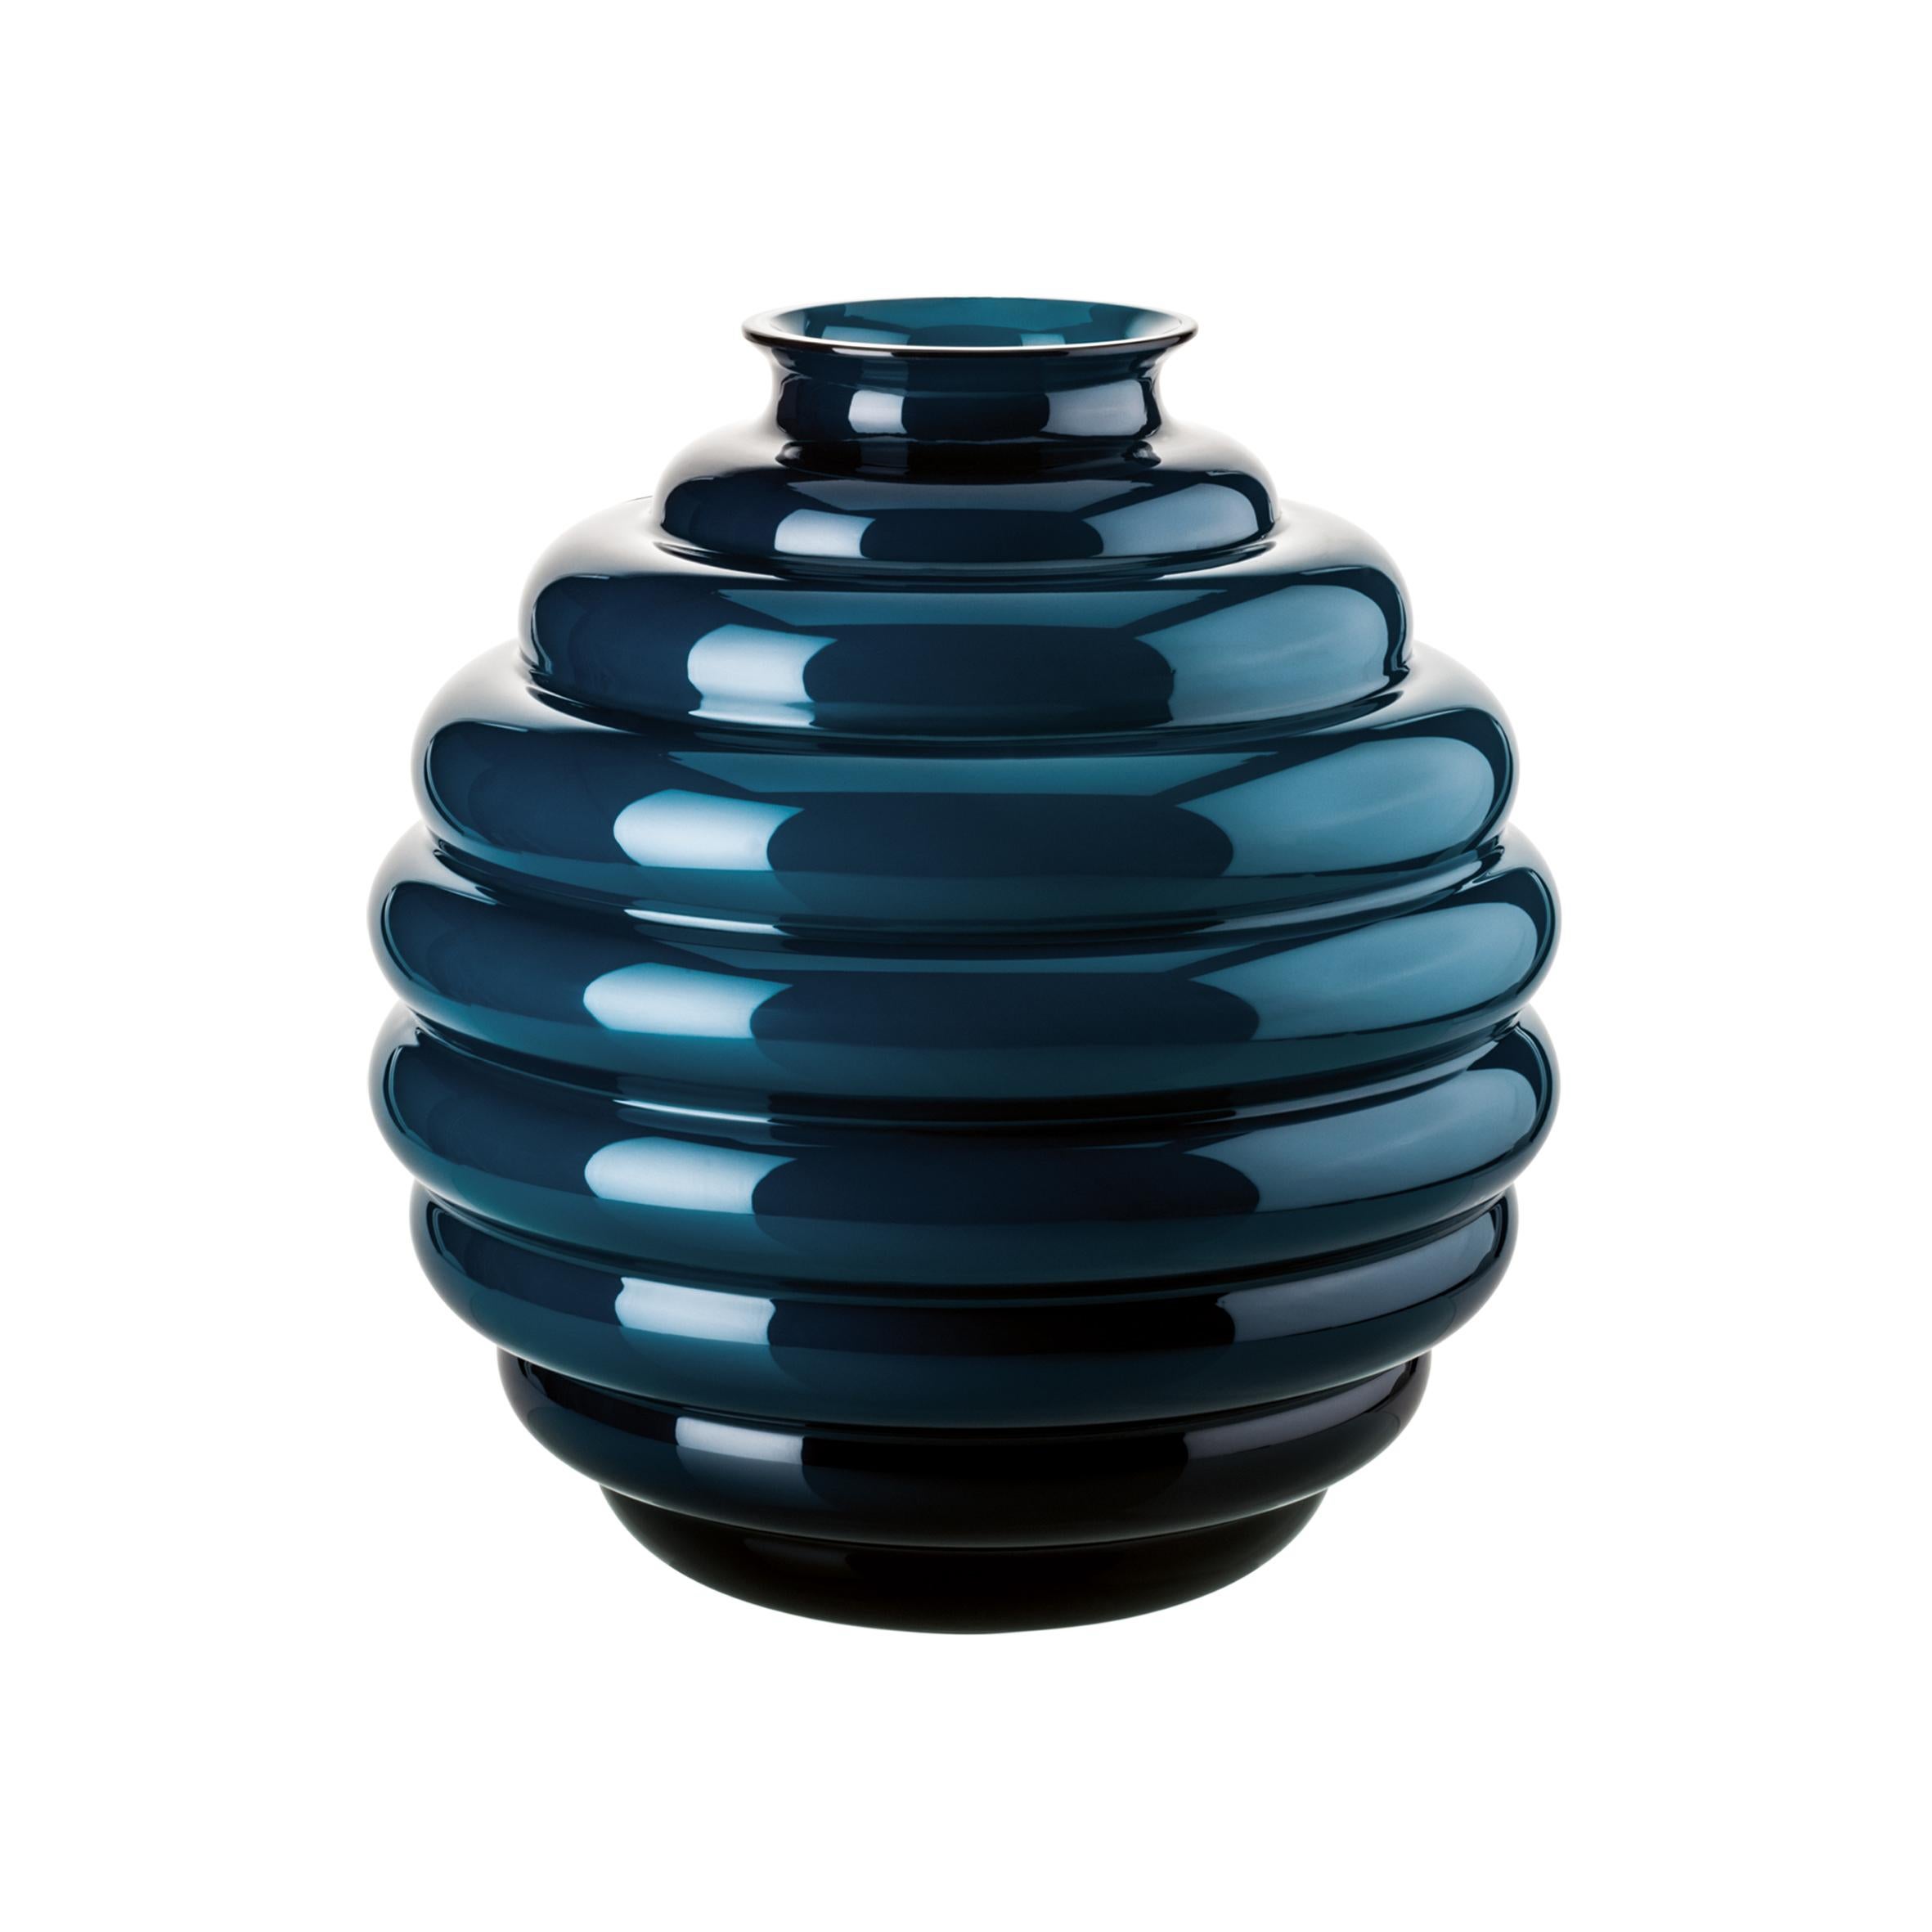 Venini glass vase in horizon blue designed by Napoleone Martinuzzi in 1930. Perfect for indoor home decor as container or statement piece for any room. Also available in other colors on 1stdibs.

Dimensions: 26 cm diameter x 29 cm height.